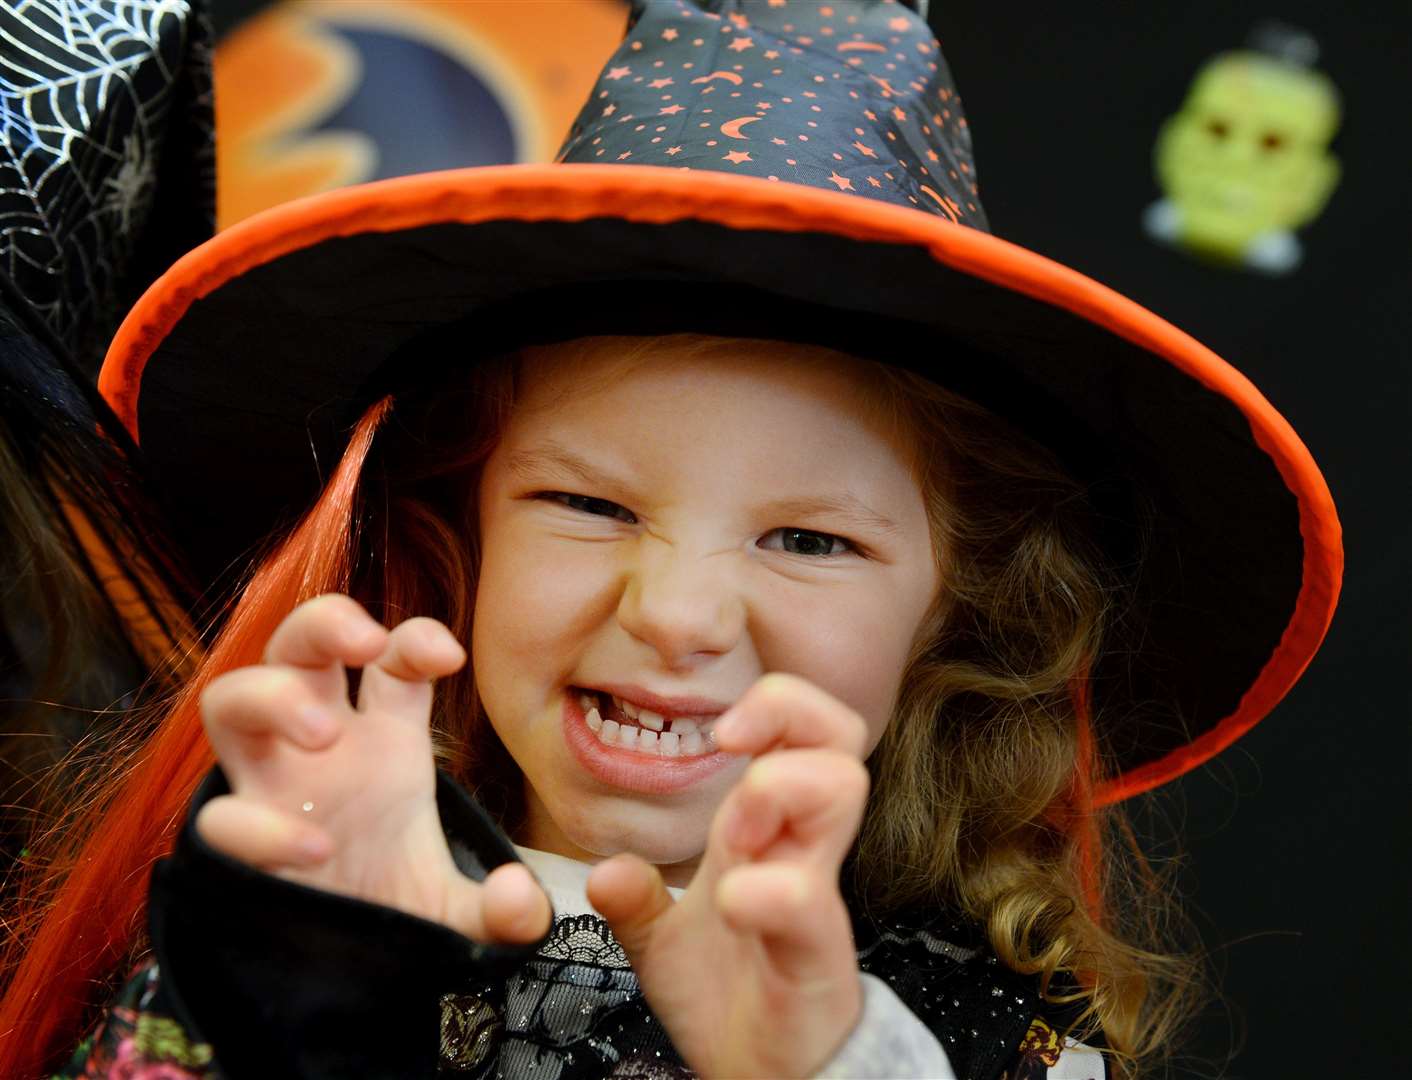 Deputy First Minister John Swinney has urged families and children to avoid guising this Halloween.